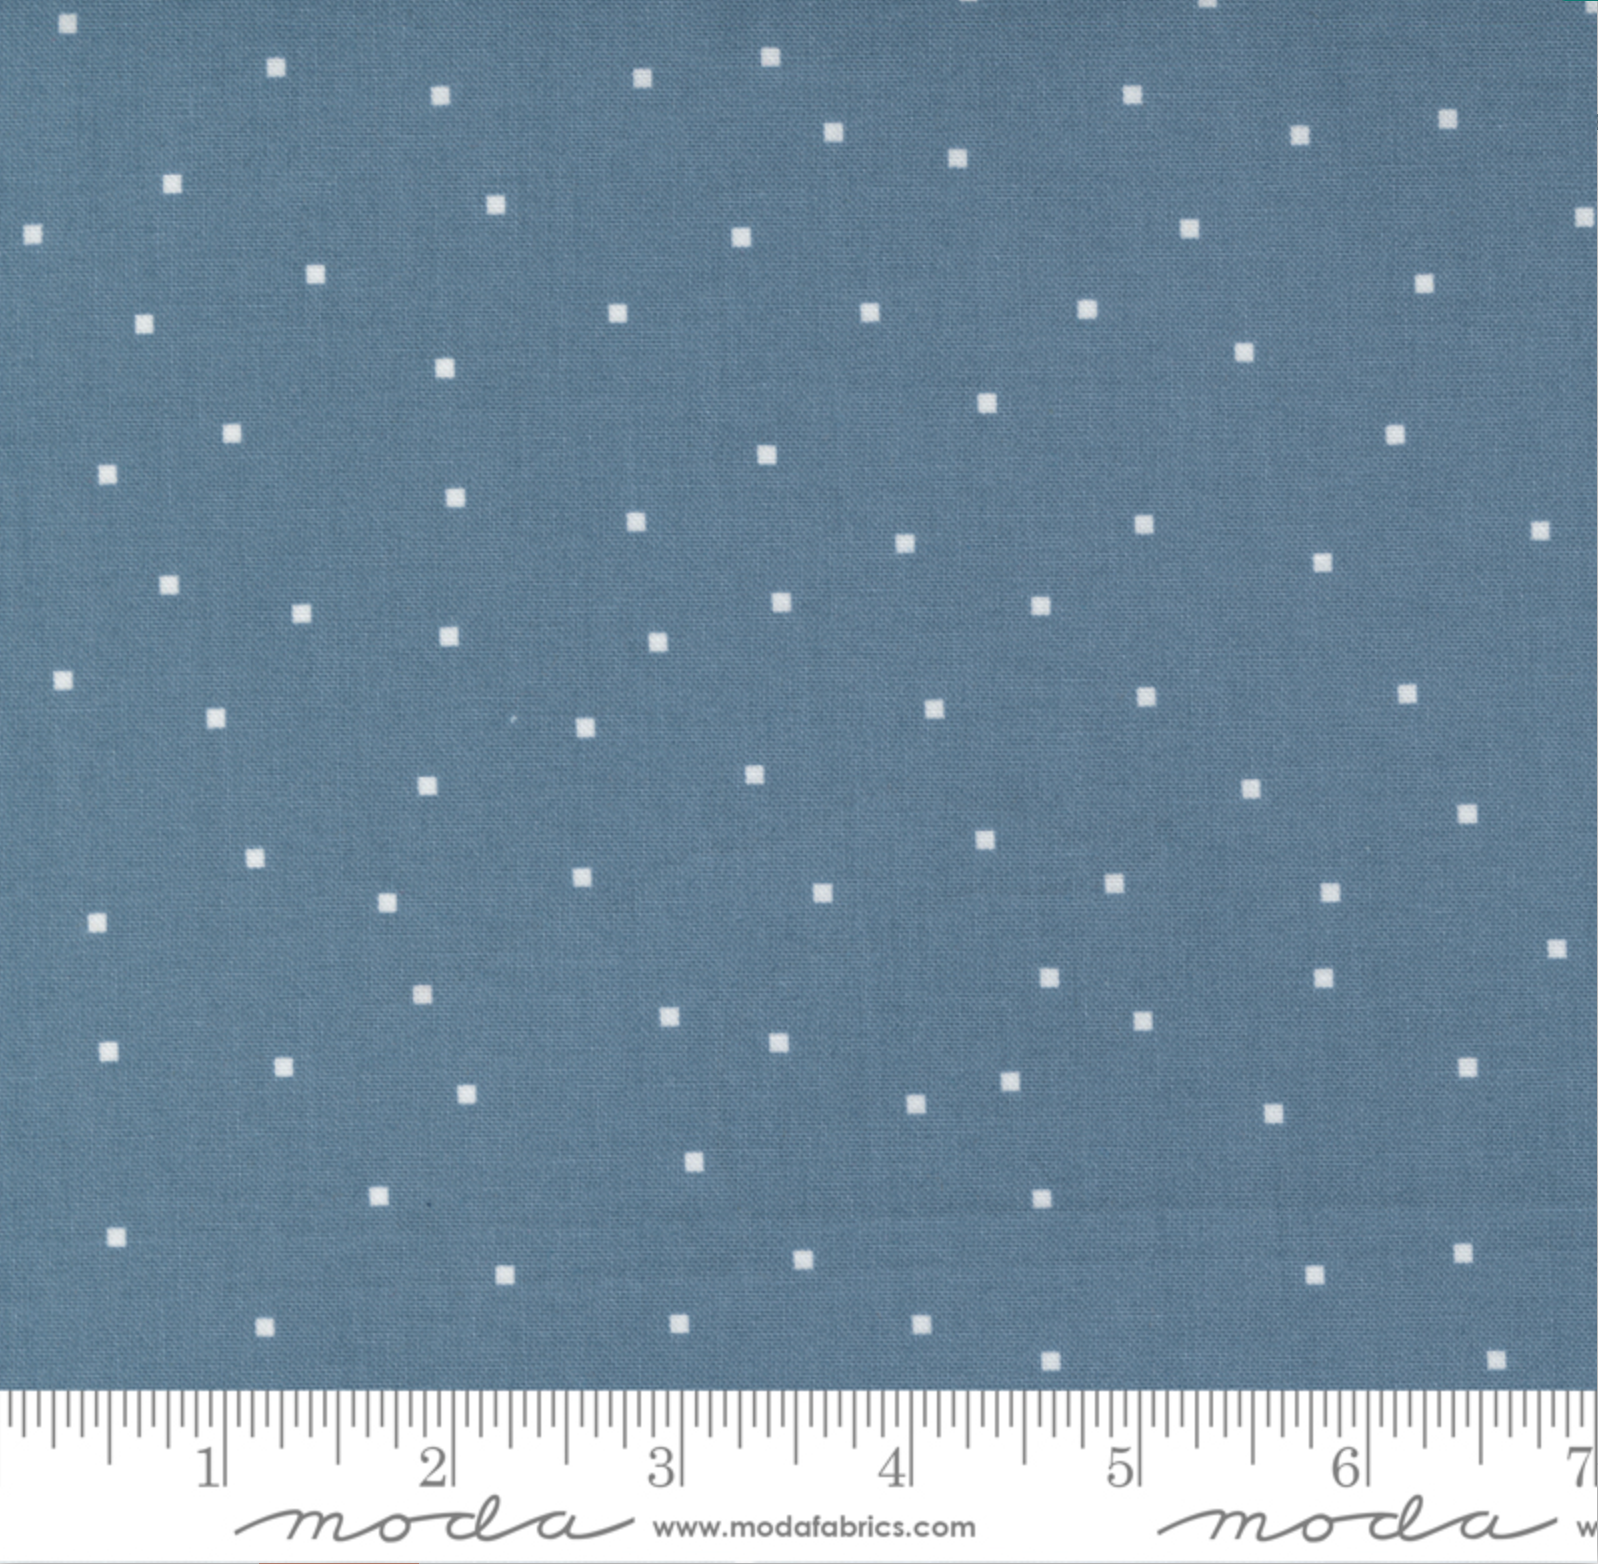 Meander by Aneela Hoey for Moda - Tiny Square Dot Indigo (sold in 25cm  (10") increments)